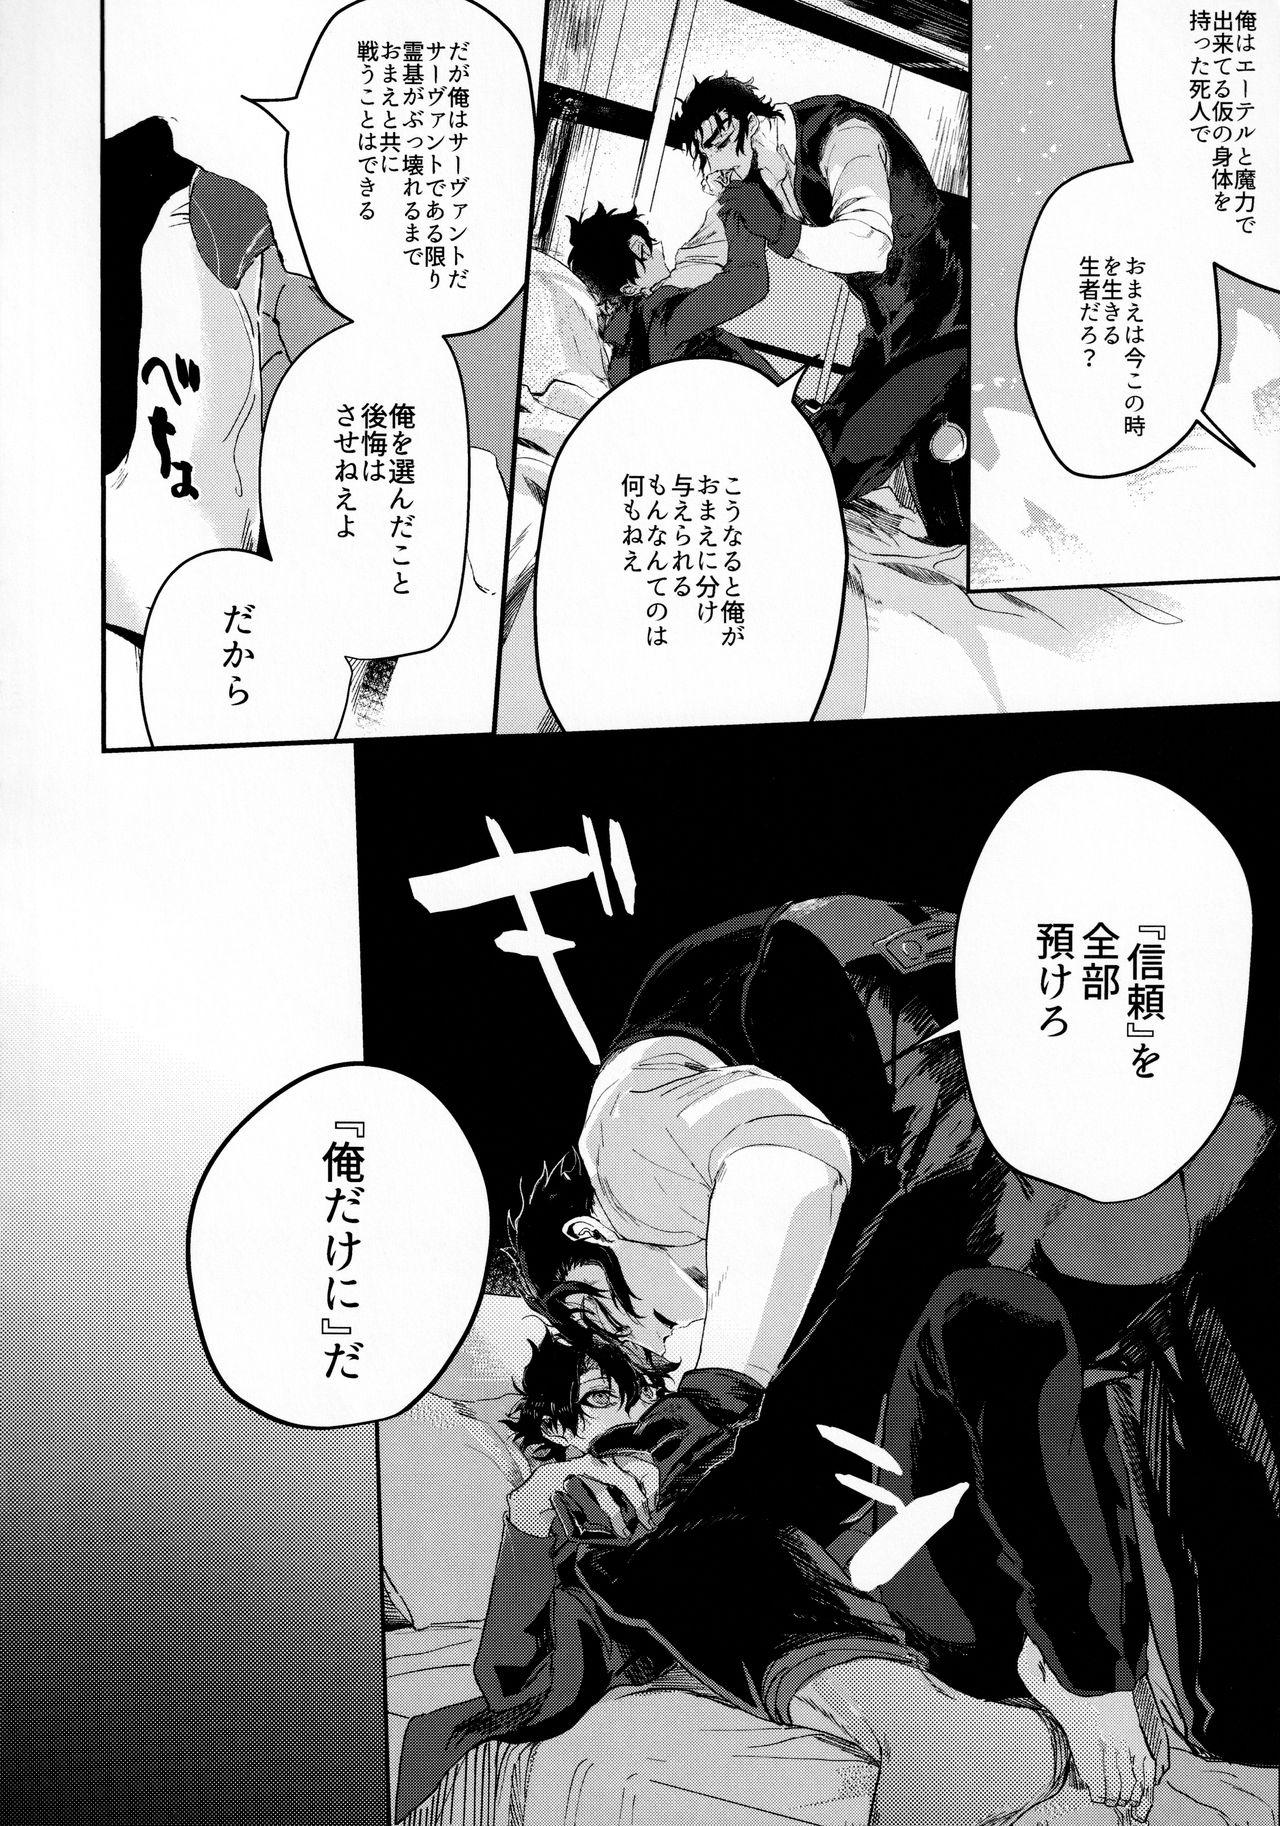 Desperate 耽溺と熱 - Fate grand order 18yearsold - Page 11